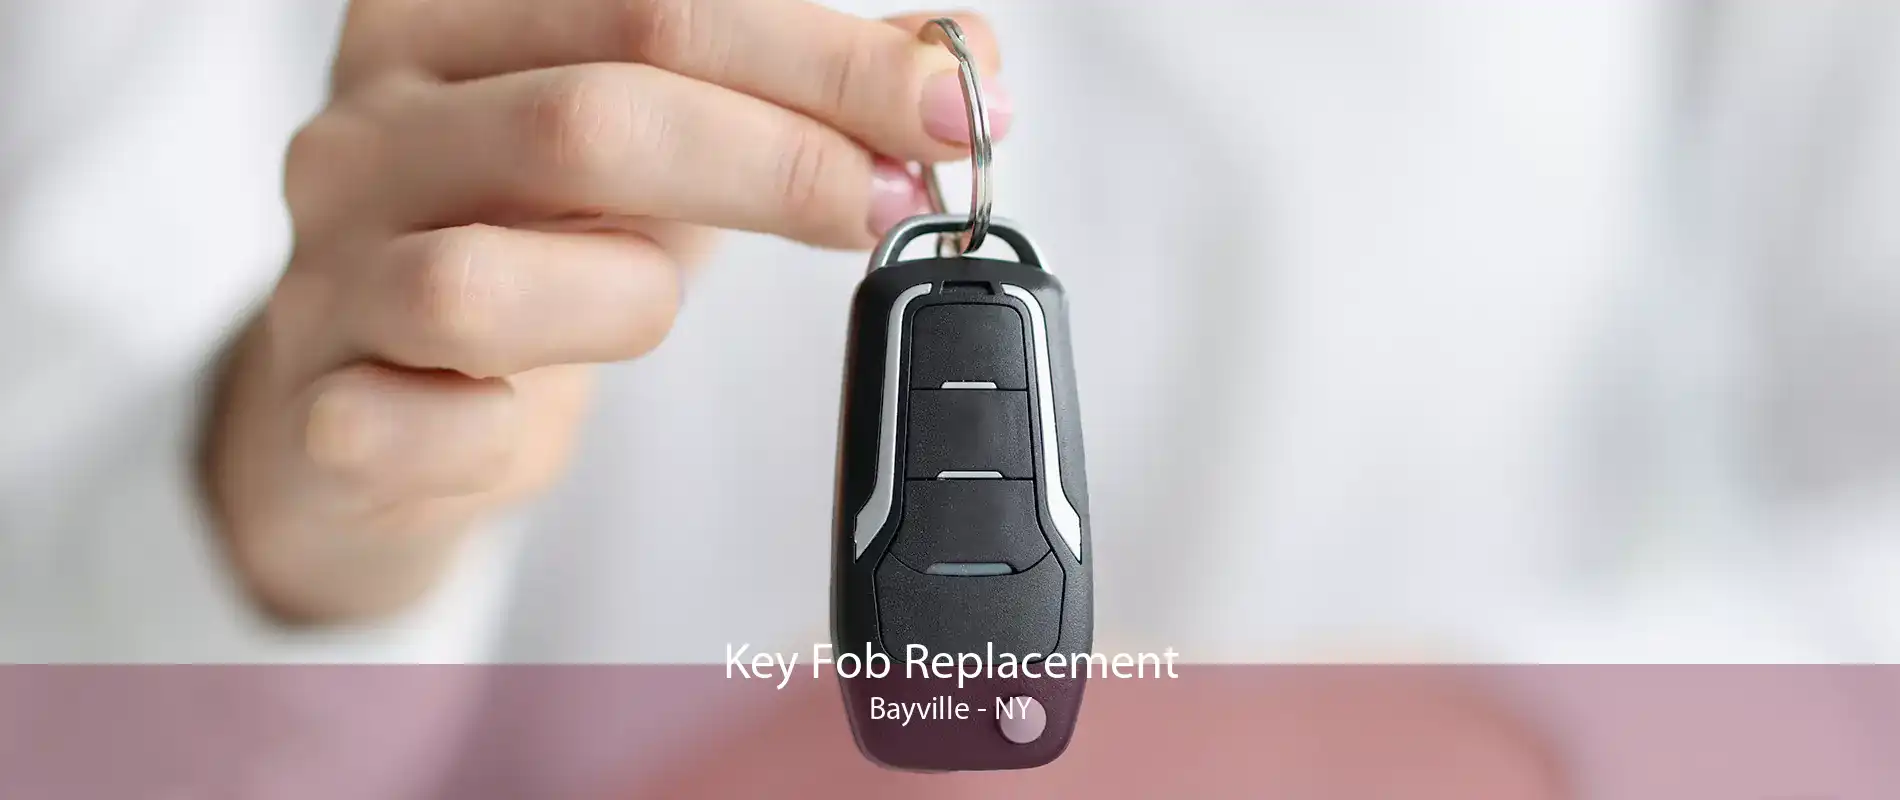 Key Fob Replacement Bayville - NY